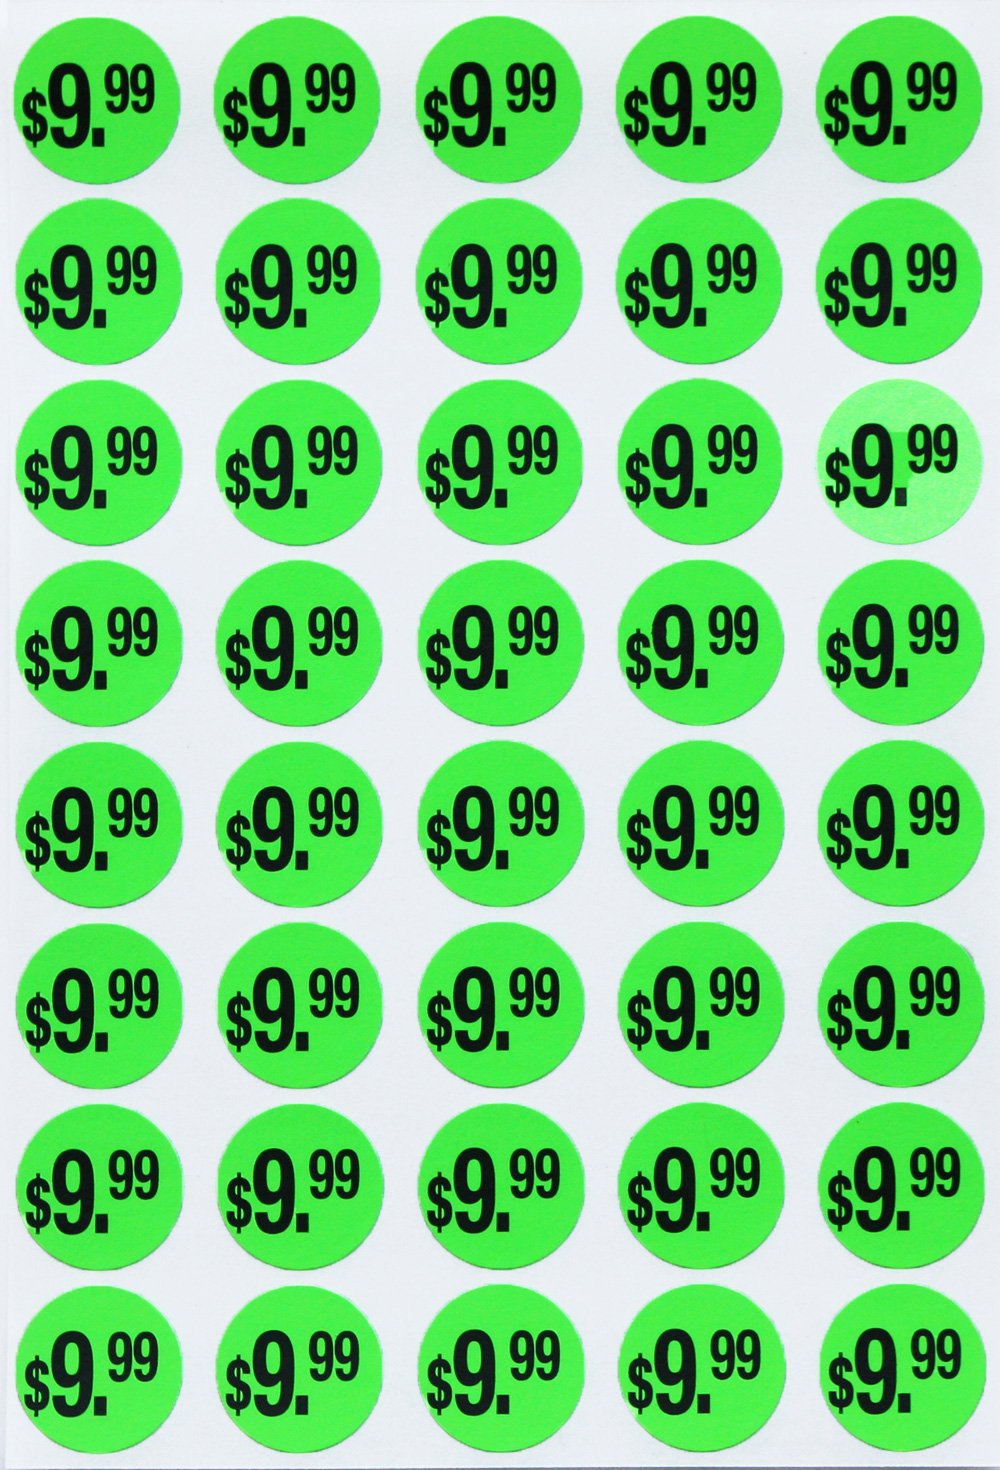 Price Dot Stickers 3/4 Inch Neon Color Labels 19mm – Royal Green Market